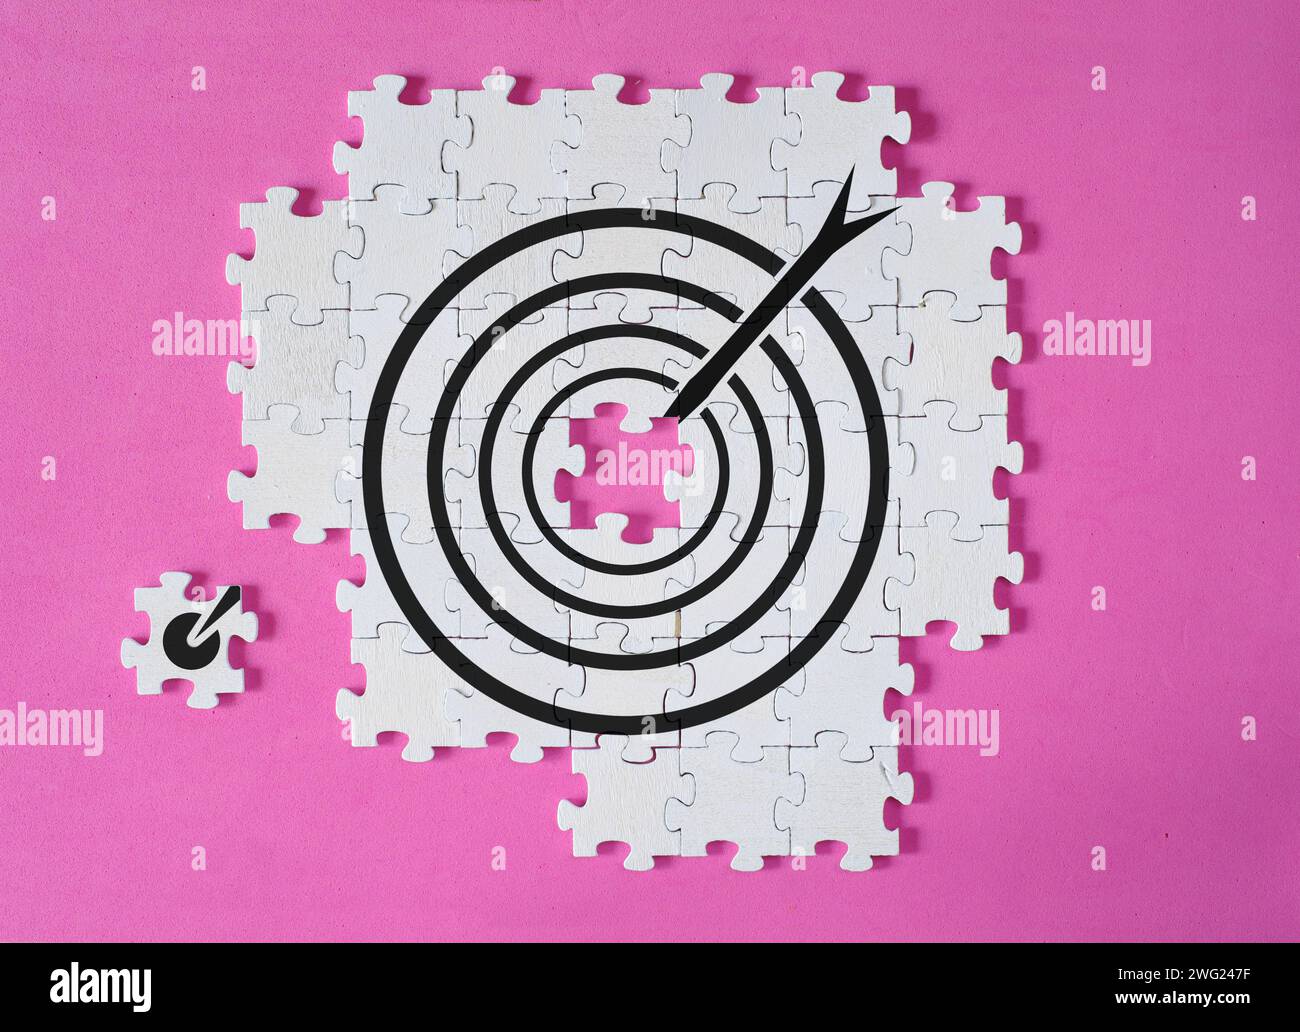 Business growth,success, innovation and human resources concept, arranged puzzle pieces with target and arrow for planning development, innovation,lea Stock Photo